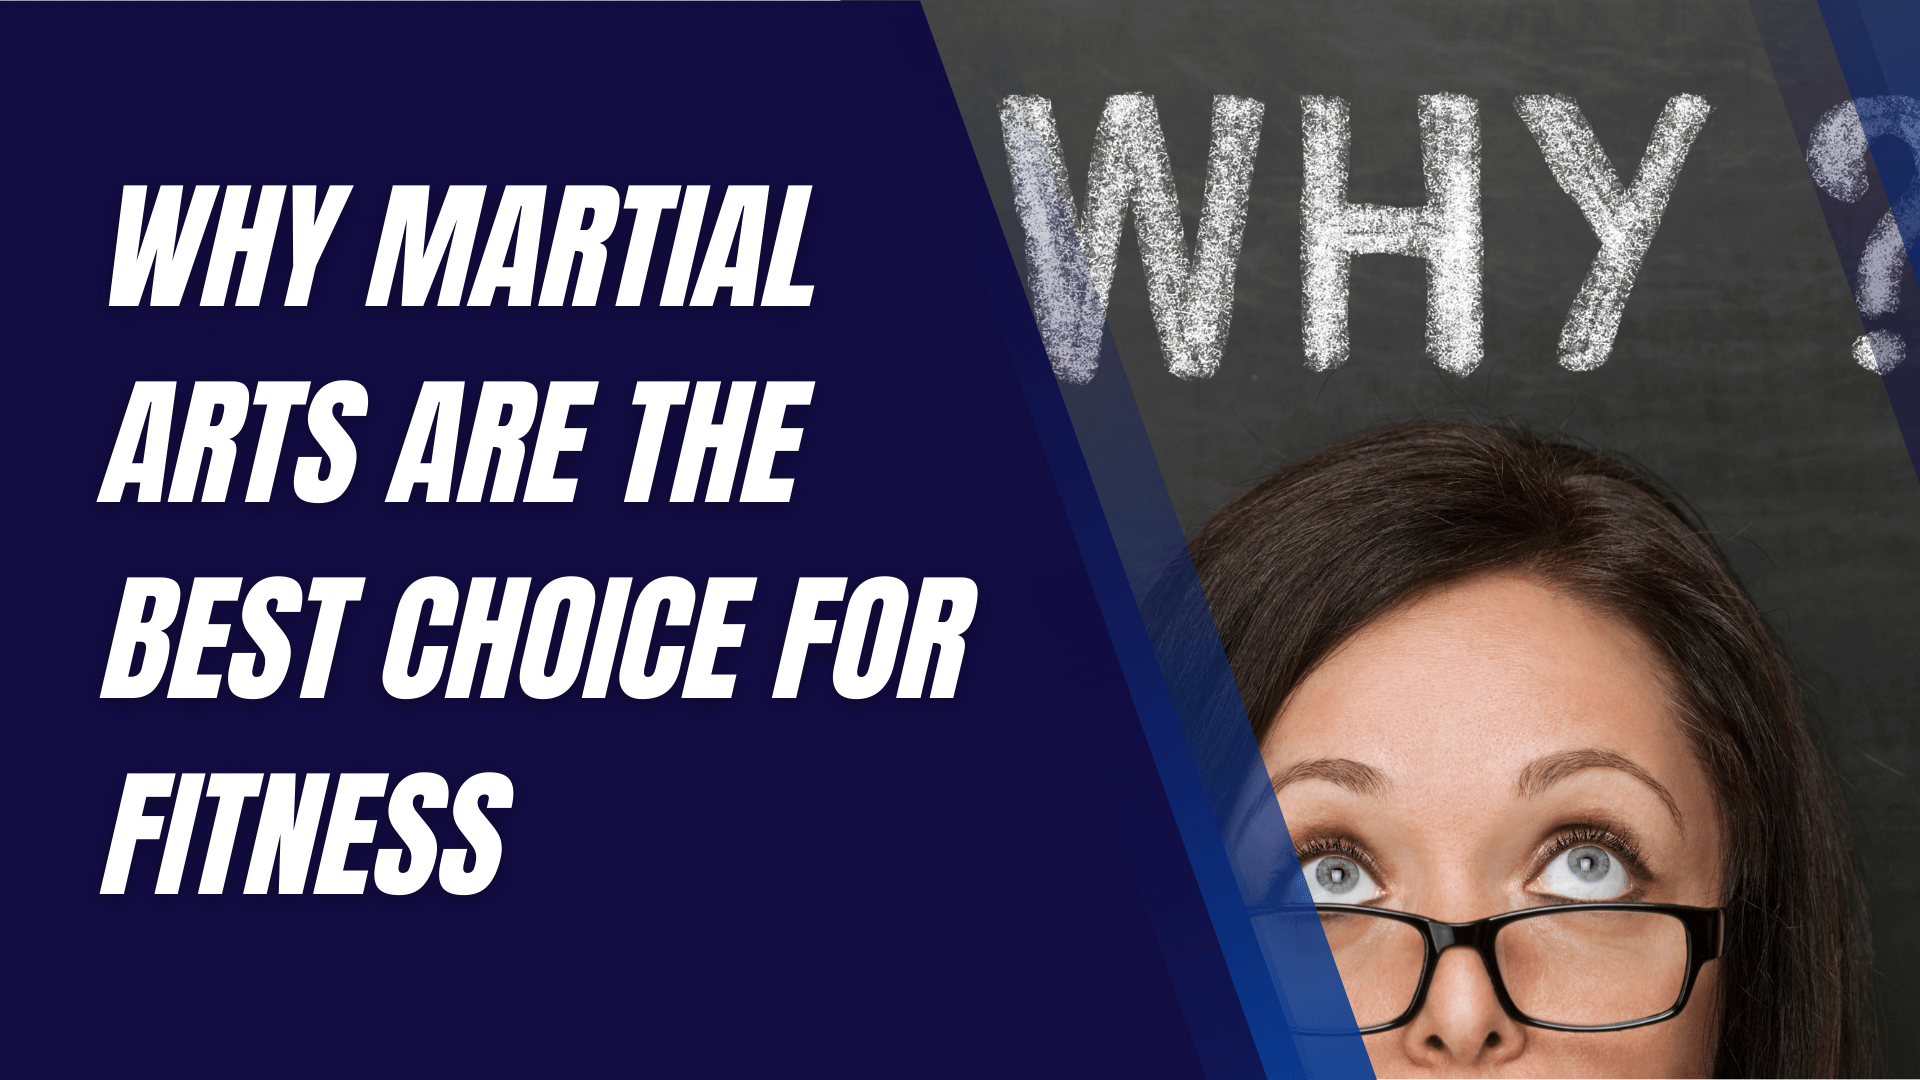 Why Martial Arts are the Best Choice for Fitness